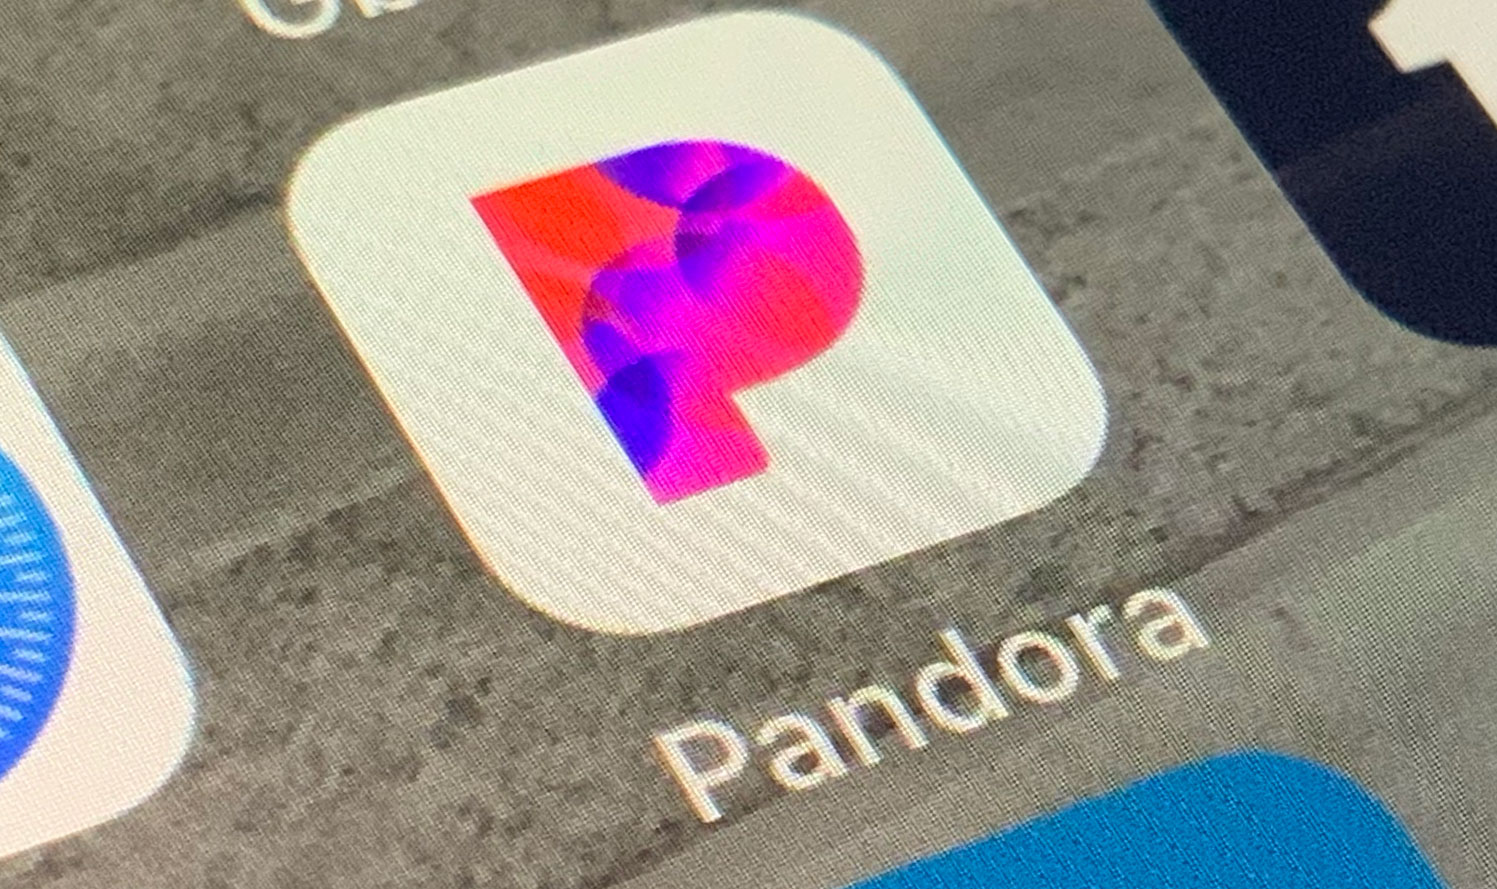 Pandora's revamped, more personalized app rolls out to all users ...